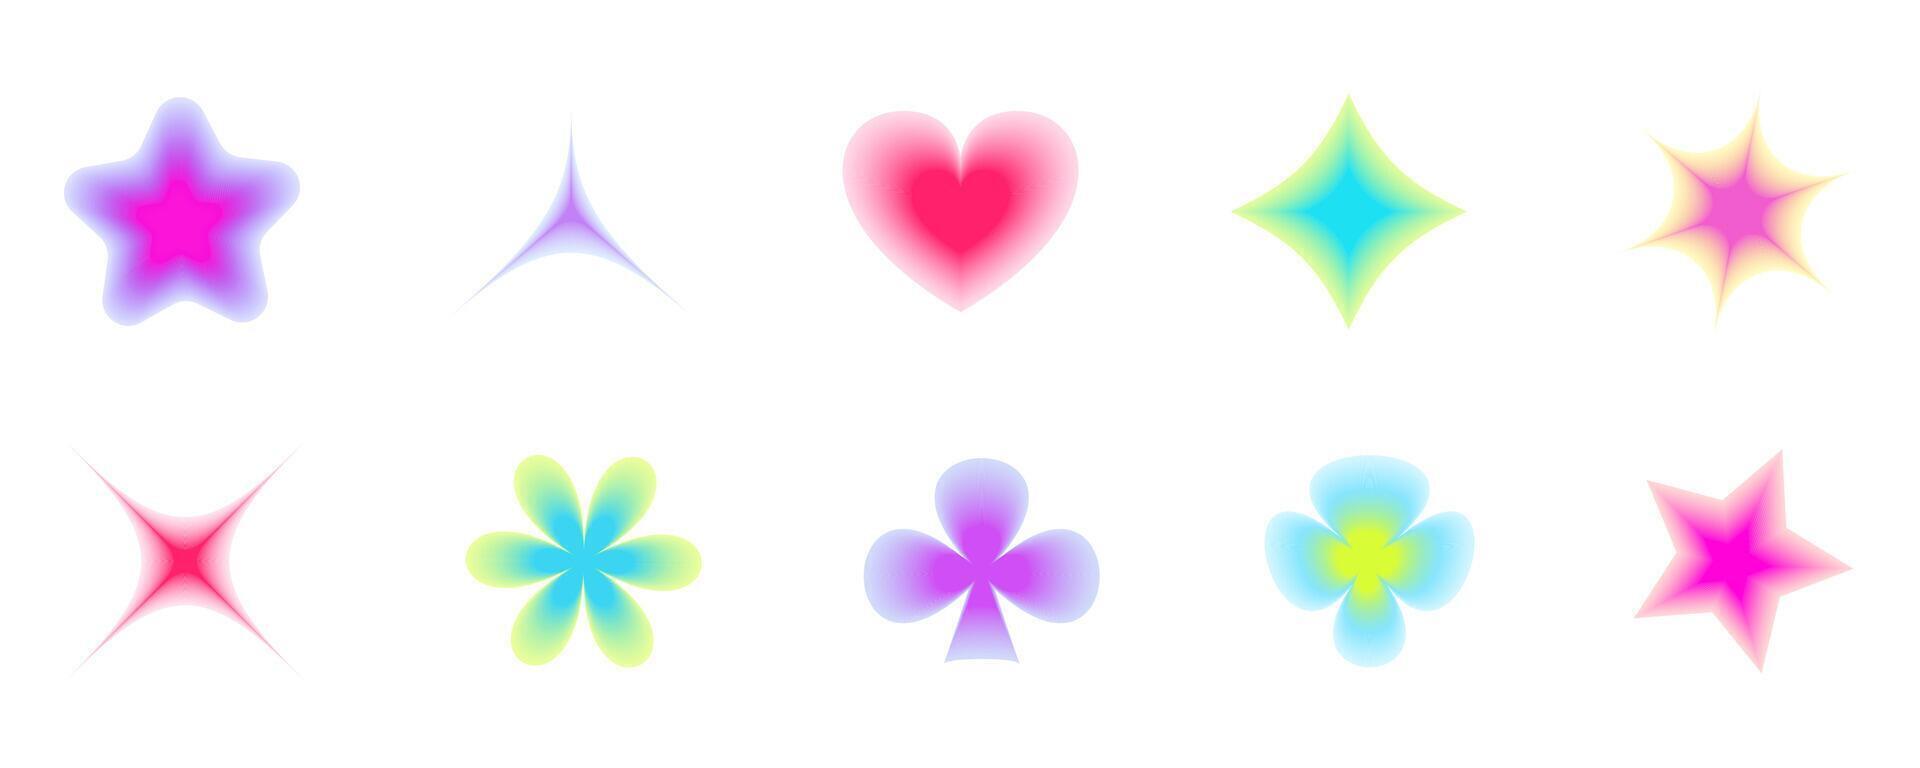 Gradient color badges y2k. Blurred heart, flower and star elements in retro style vector